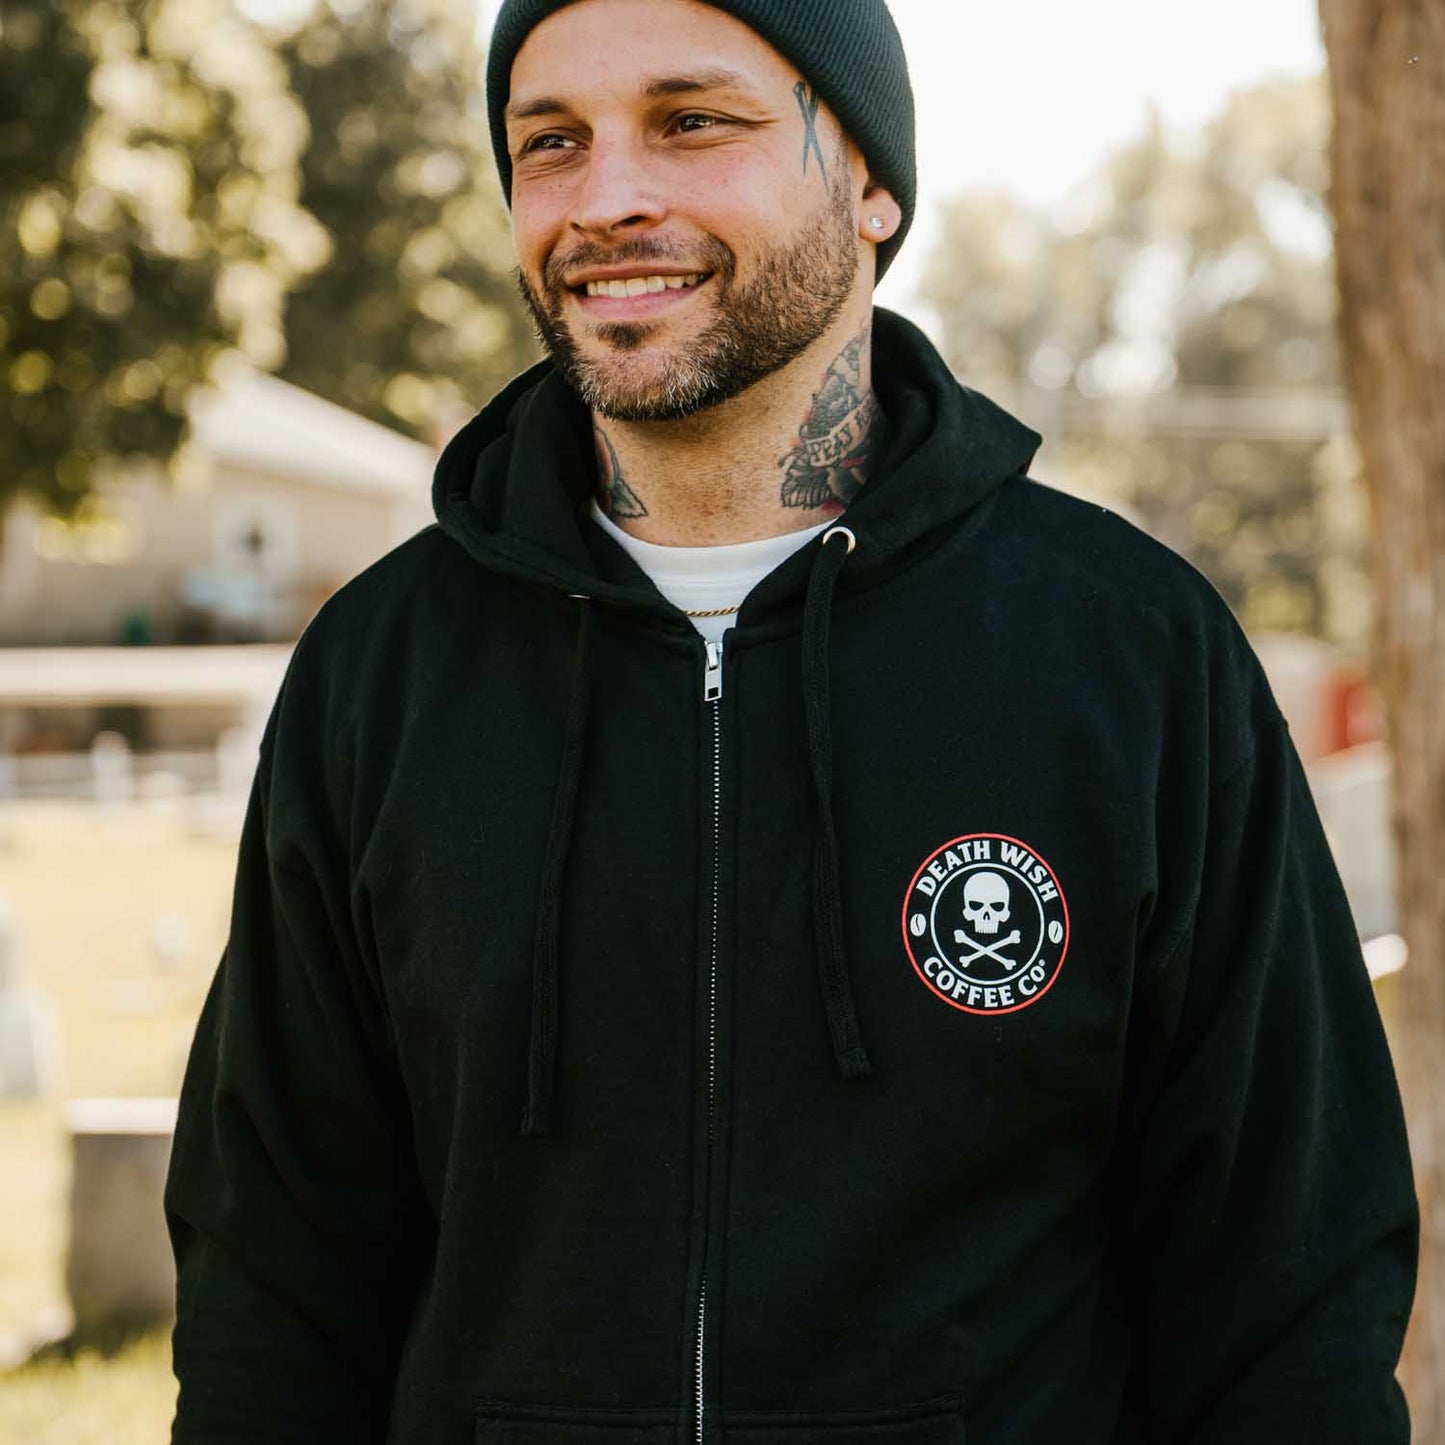 Layer up with the Death Wish Coffee Classic Logo Zip Hoodie.